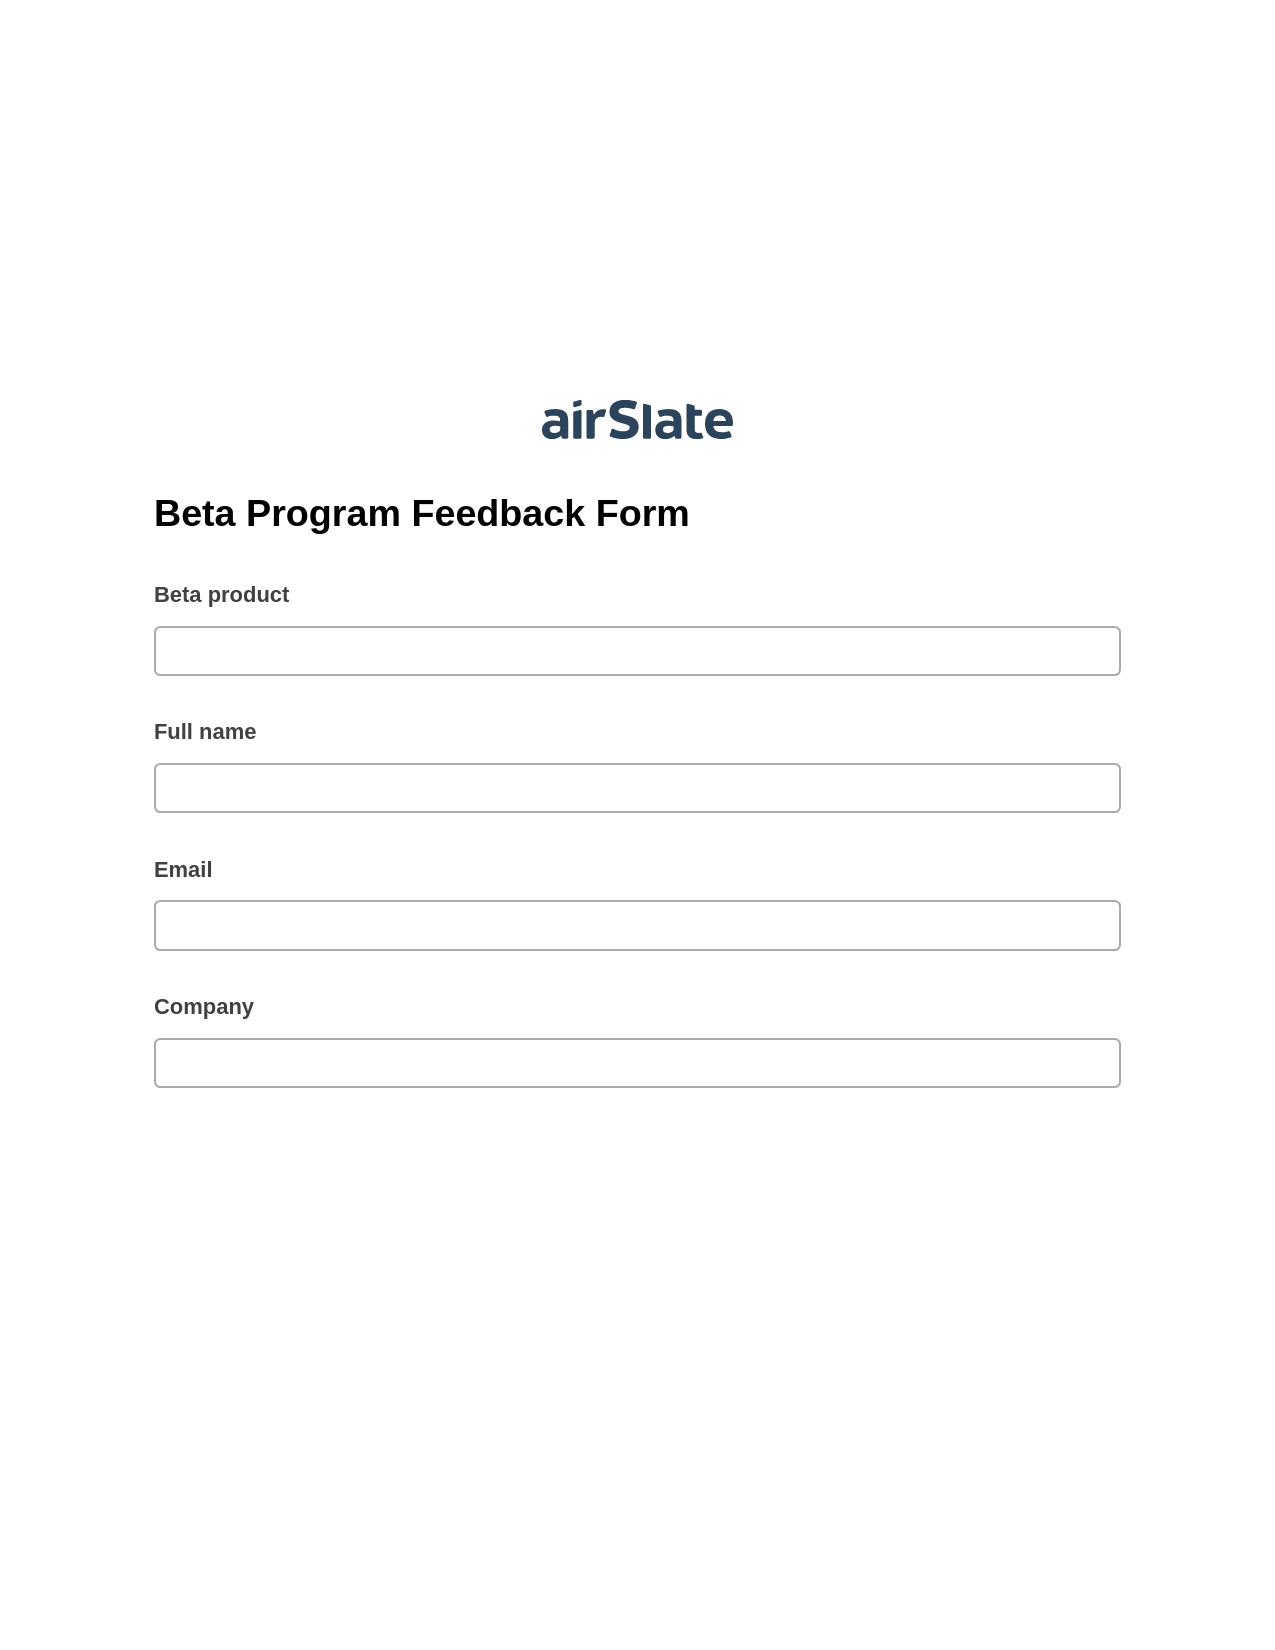 Beta Program Feedback Form Pre-fill from Excel Spreadsheet Bot, Jira Bot, Export to NetSuite Record Bot